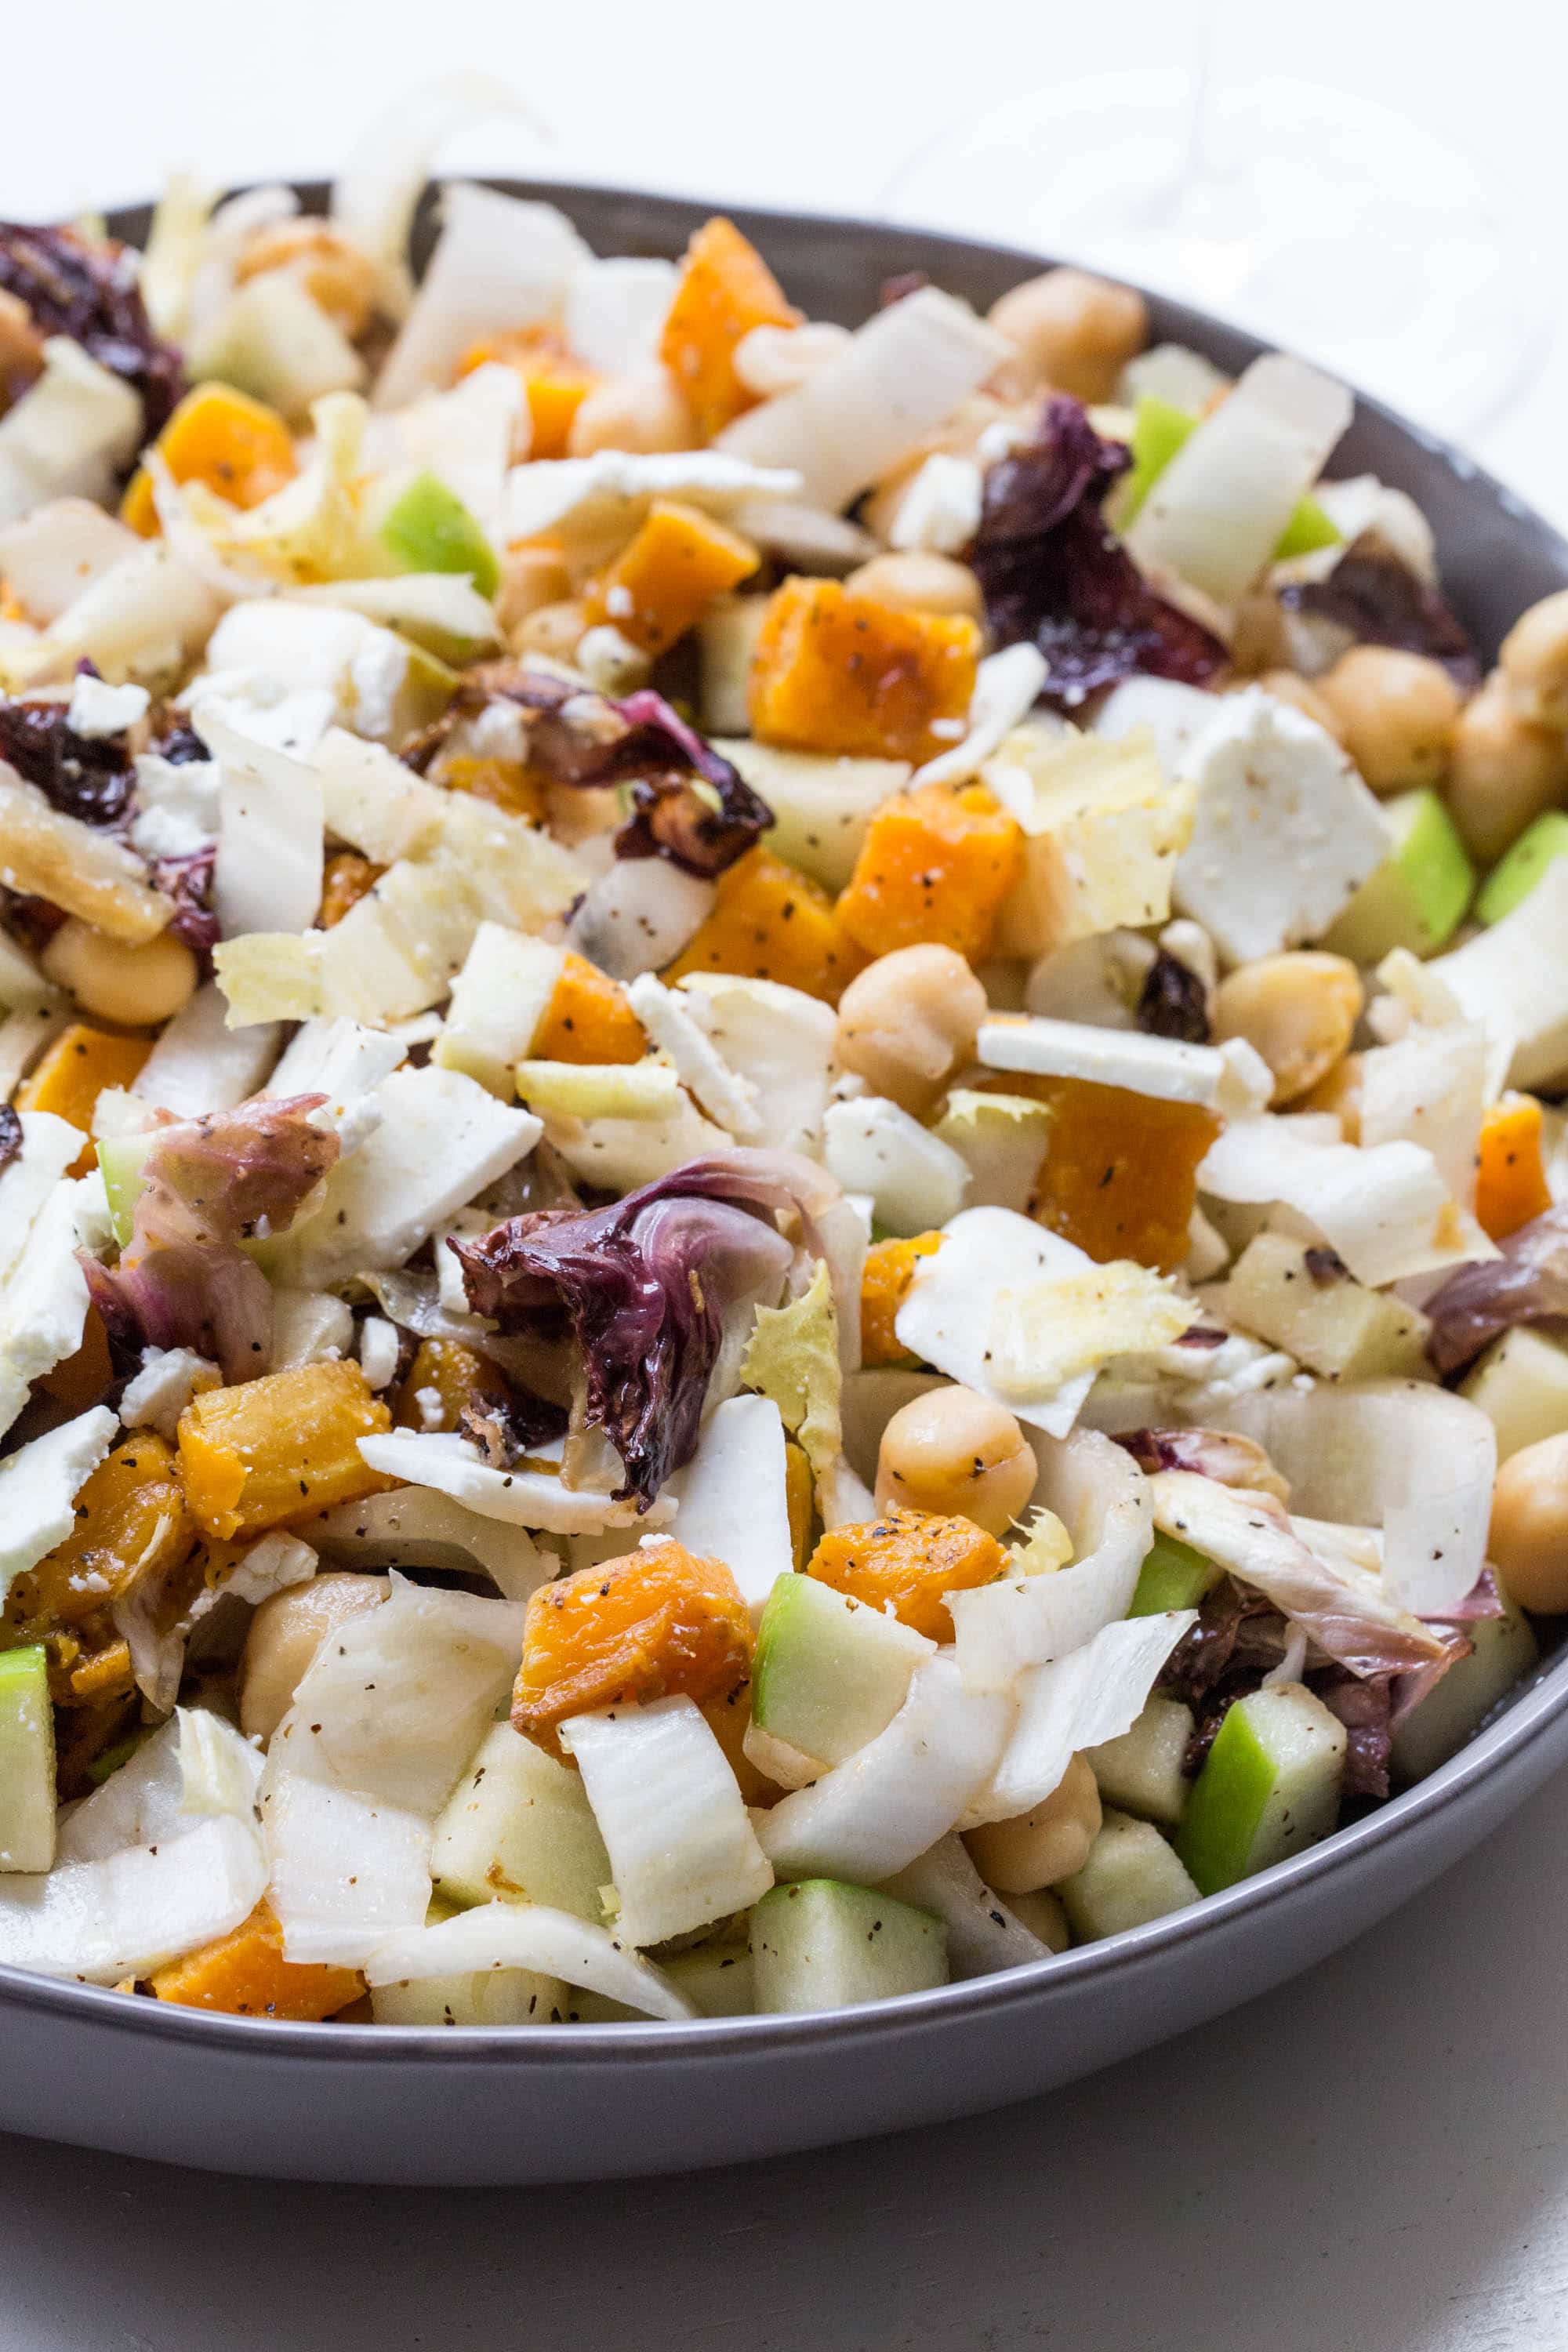 Chopped Winter Salad with butternut squash, radicchio, and chickpeas.